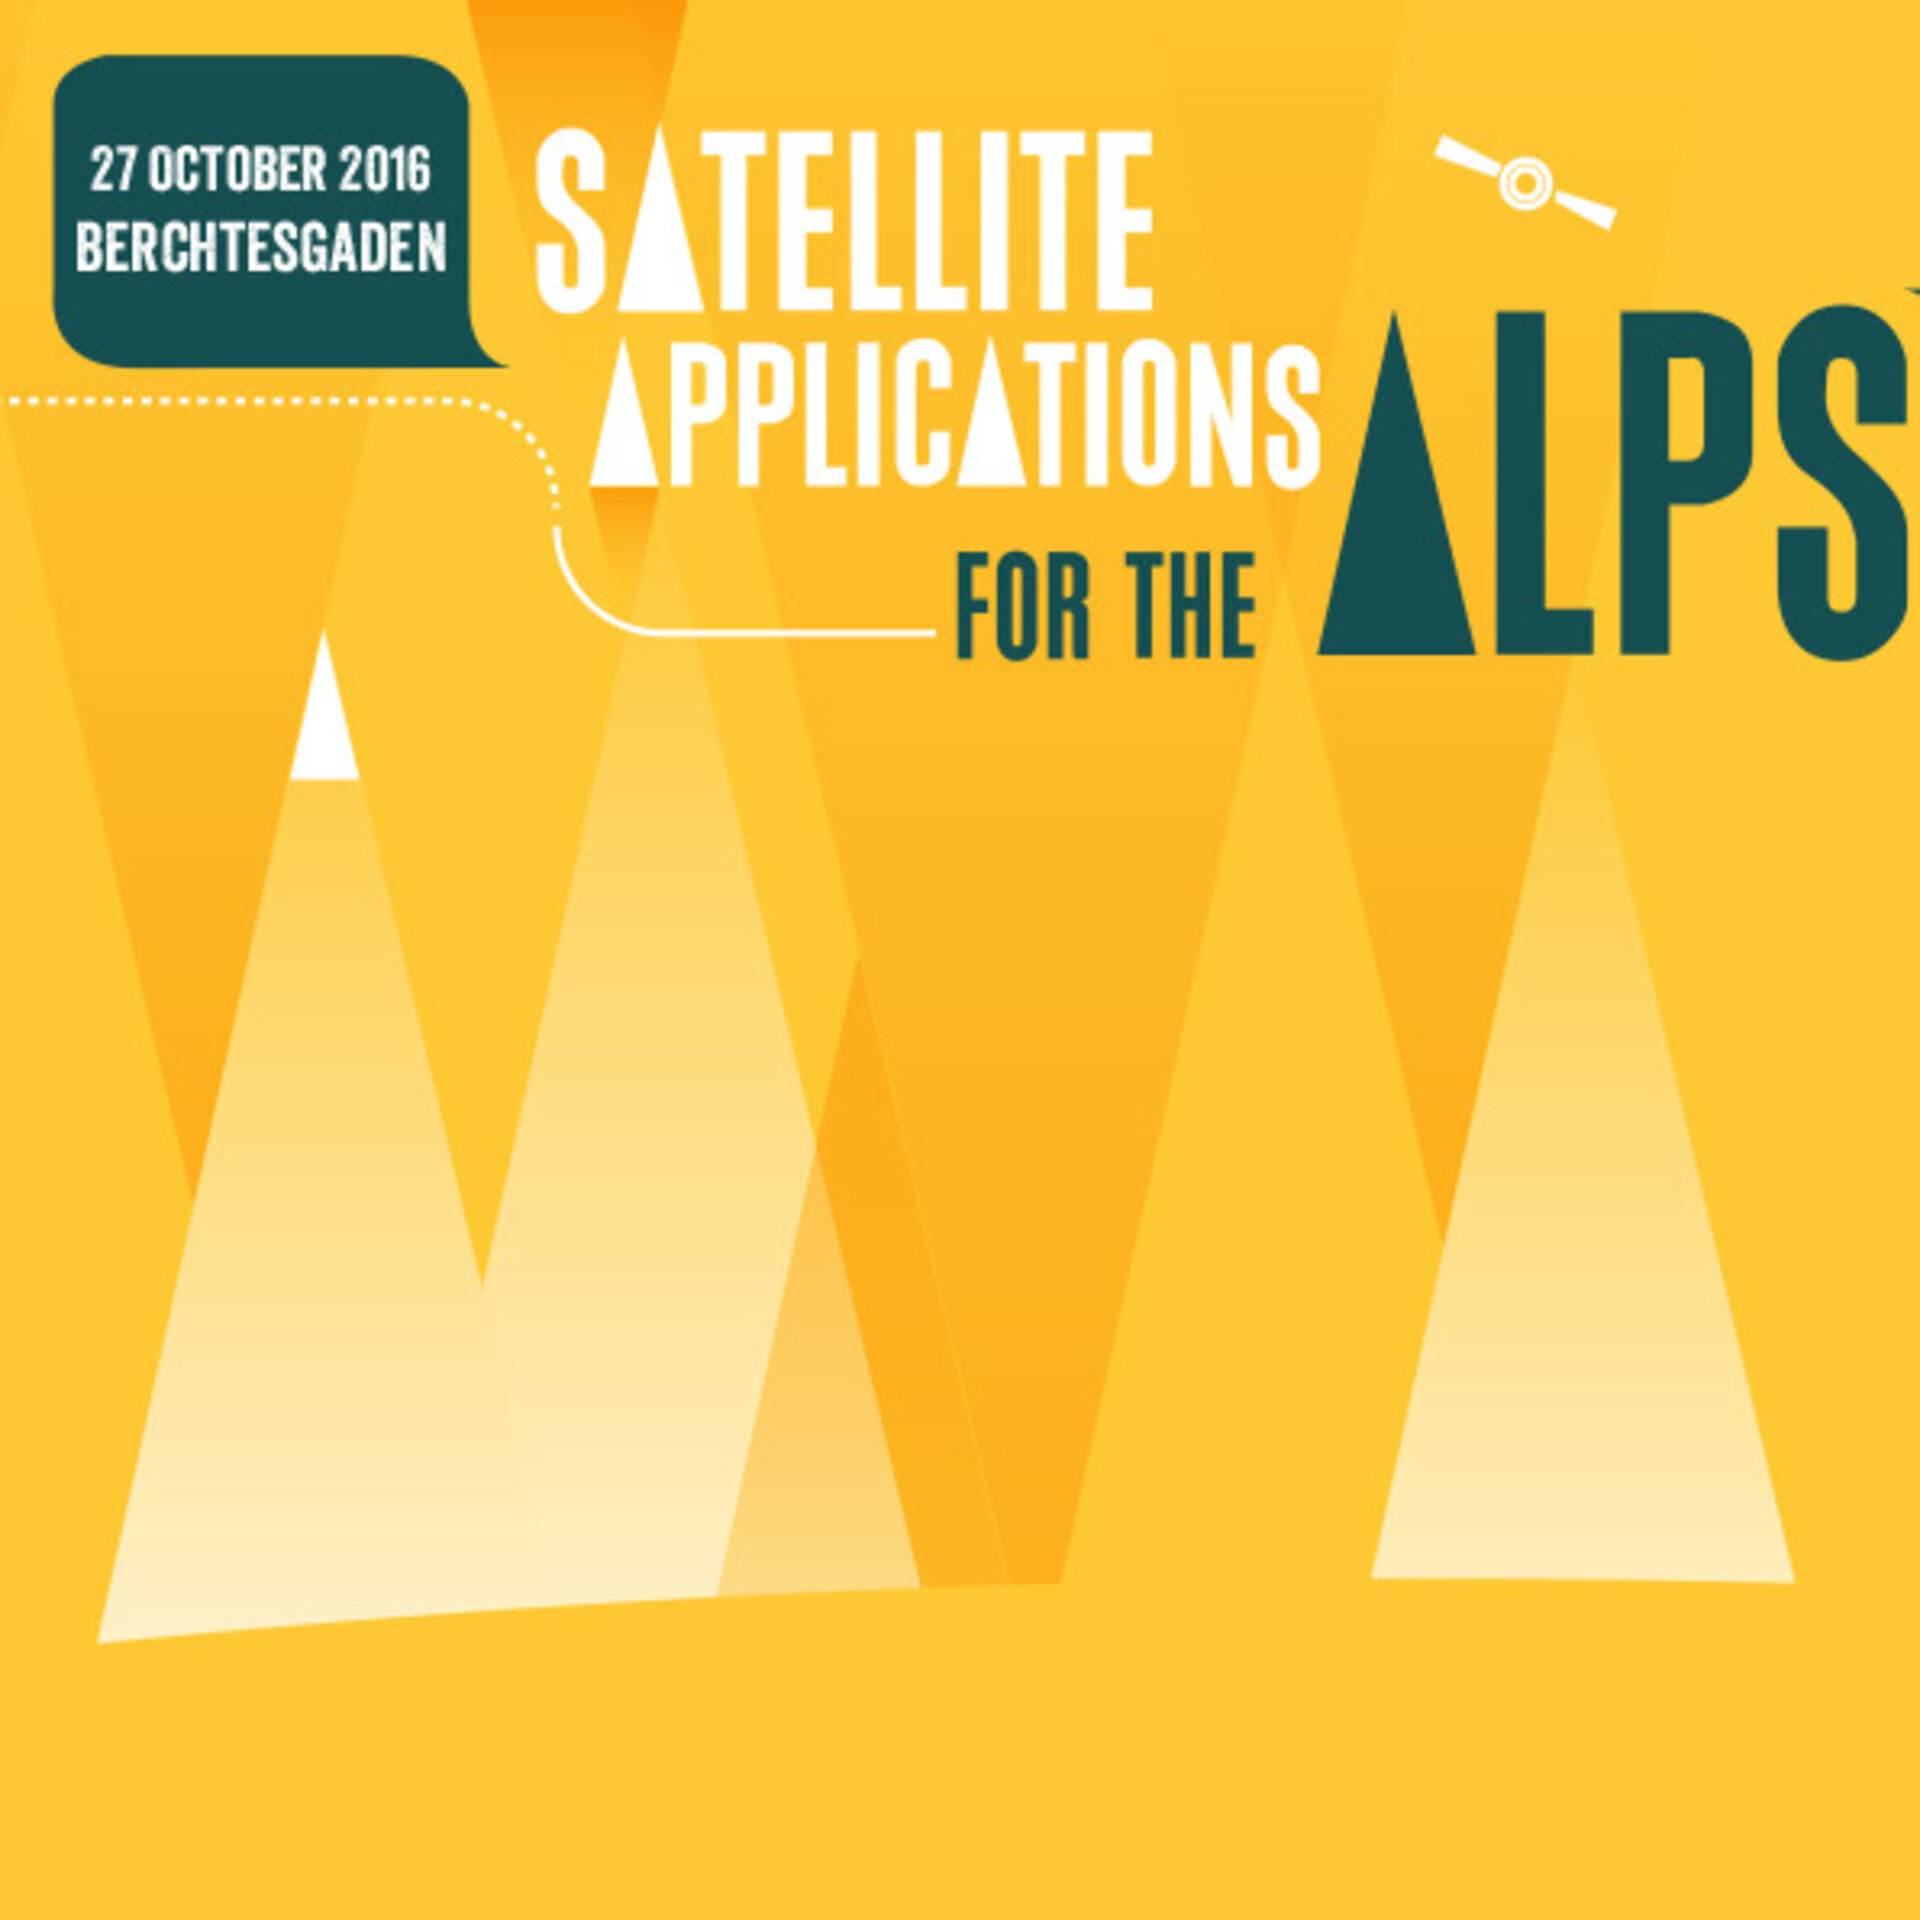 Satellite applications for the Alps conference 2016